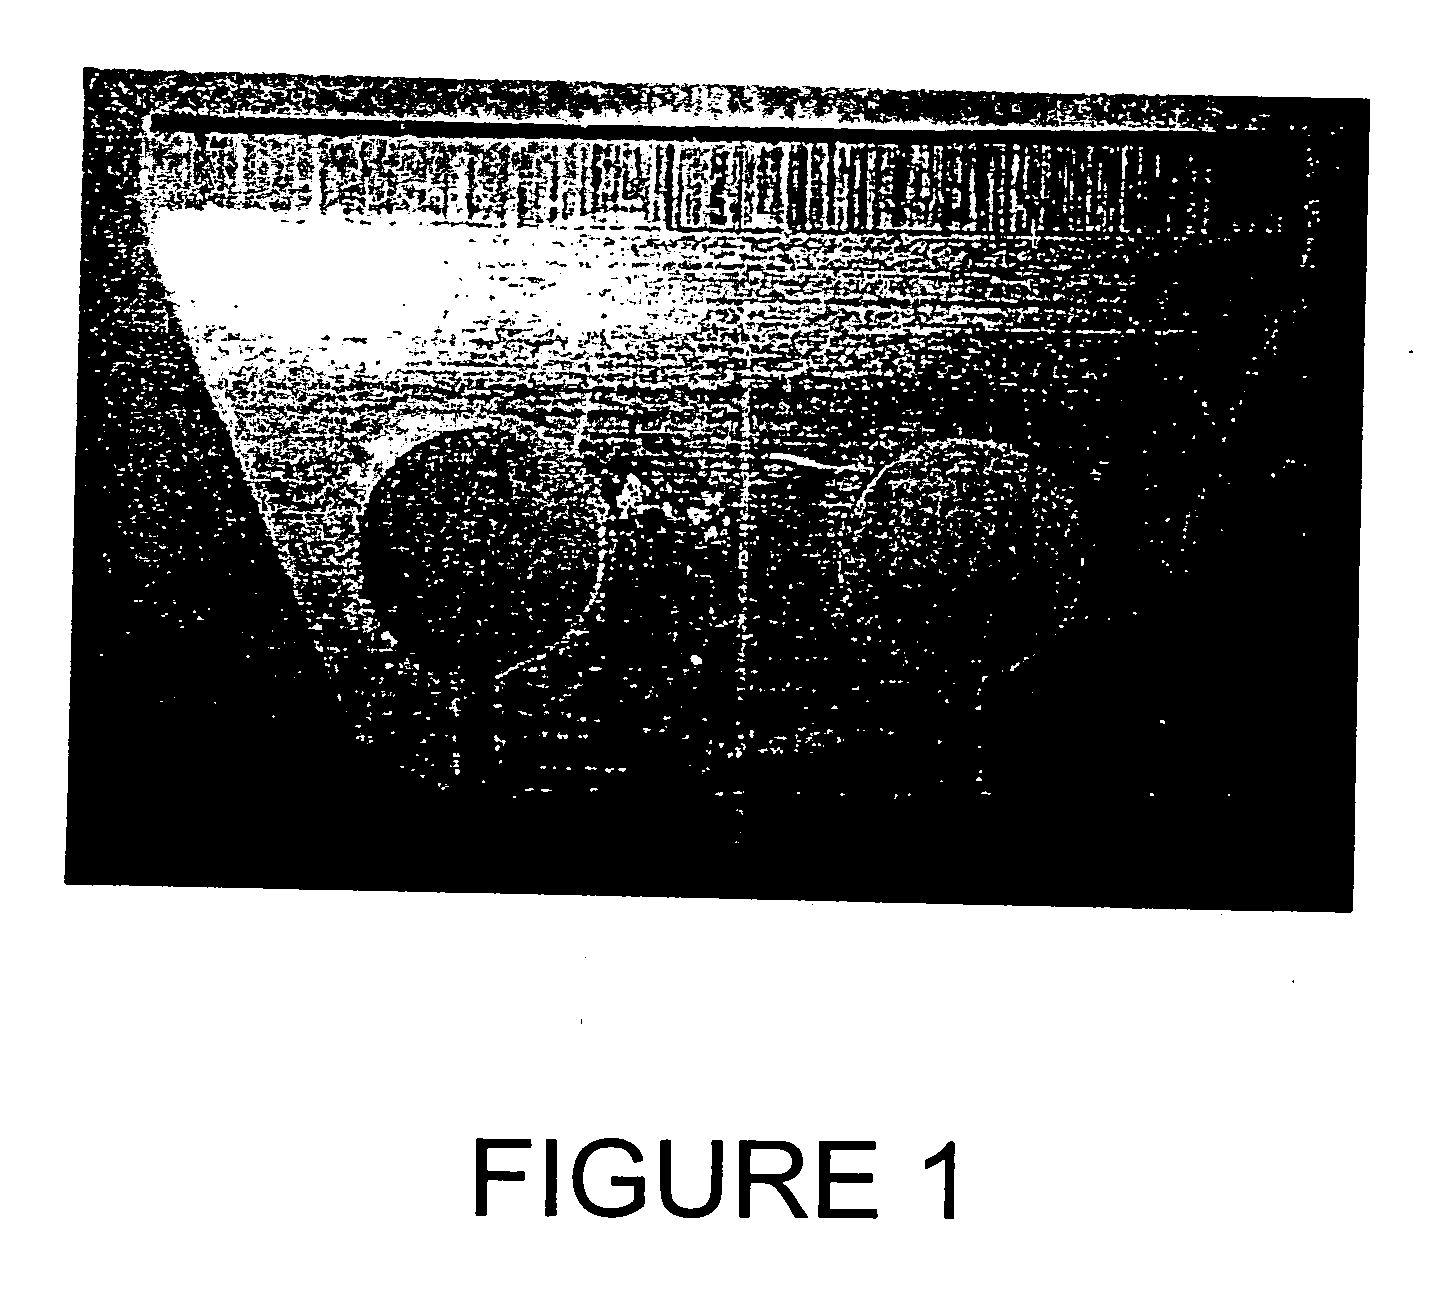 Compositions for cleaning and treating surgical devices